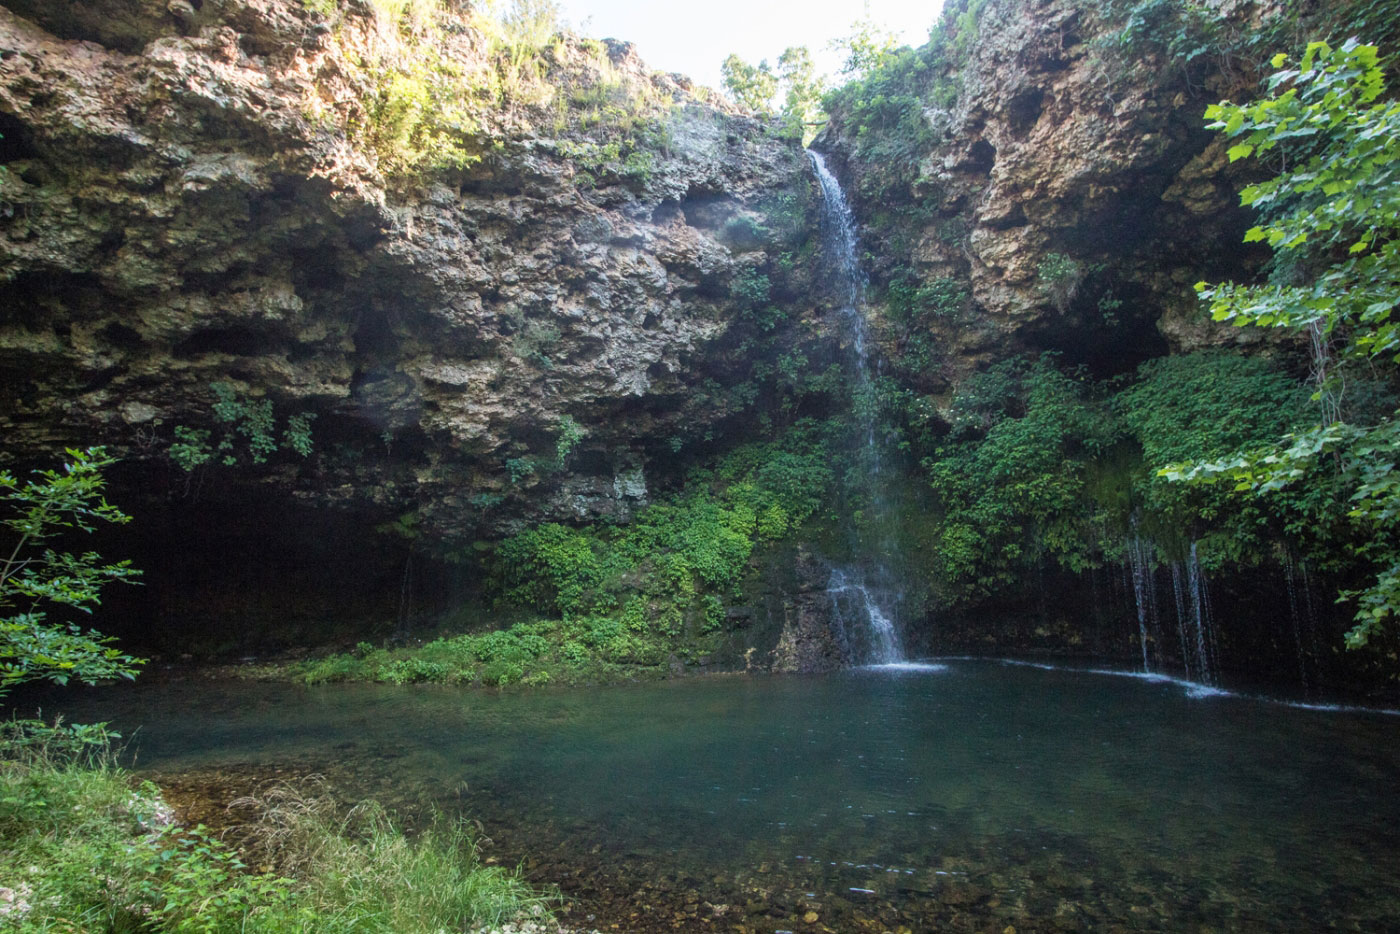 Hike Dripping Springs and Fox Den Loop in Natural Falls State Park, Oklahoma - Stav is Lost